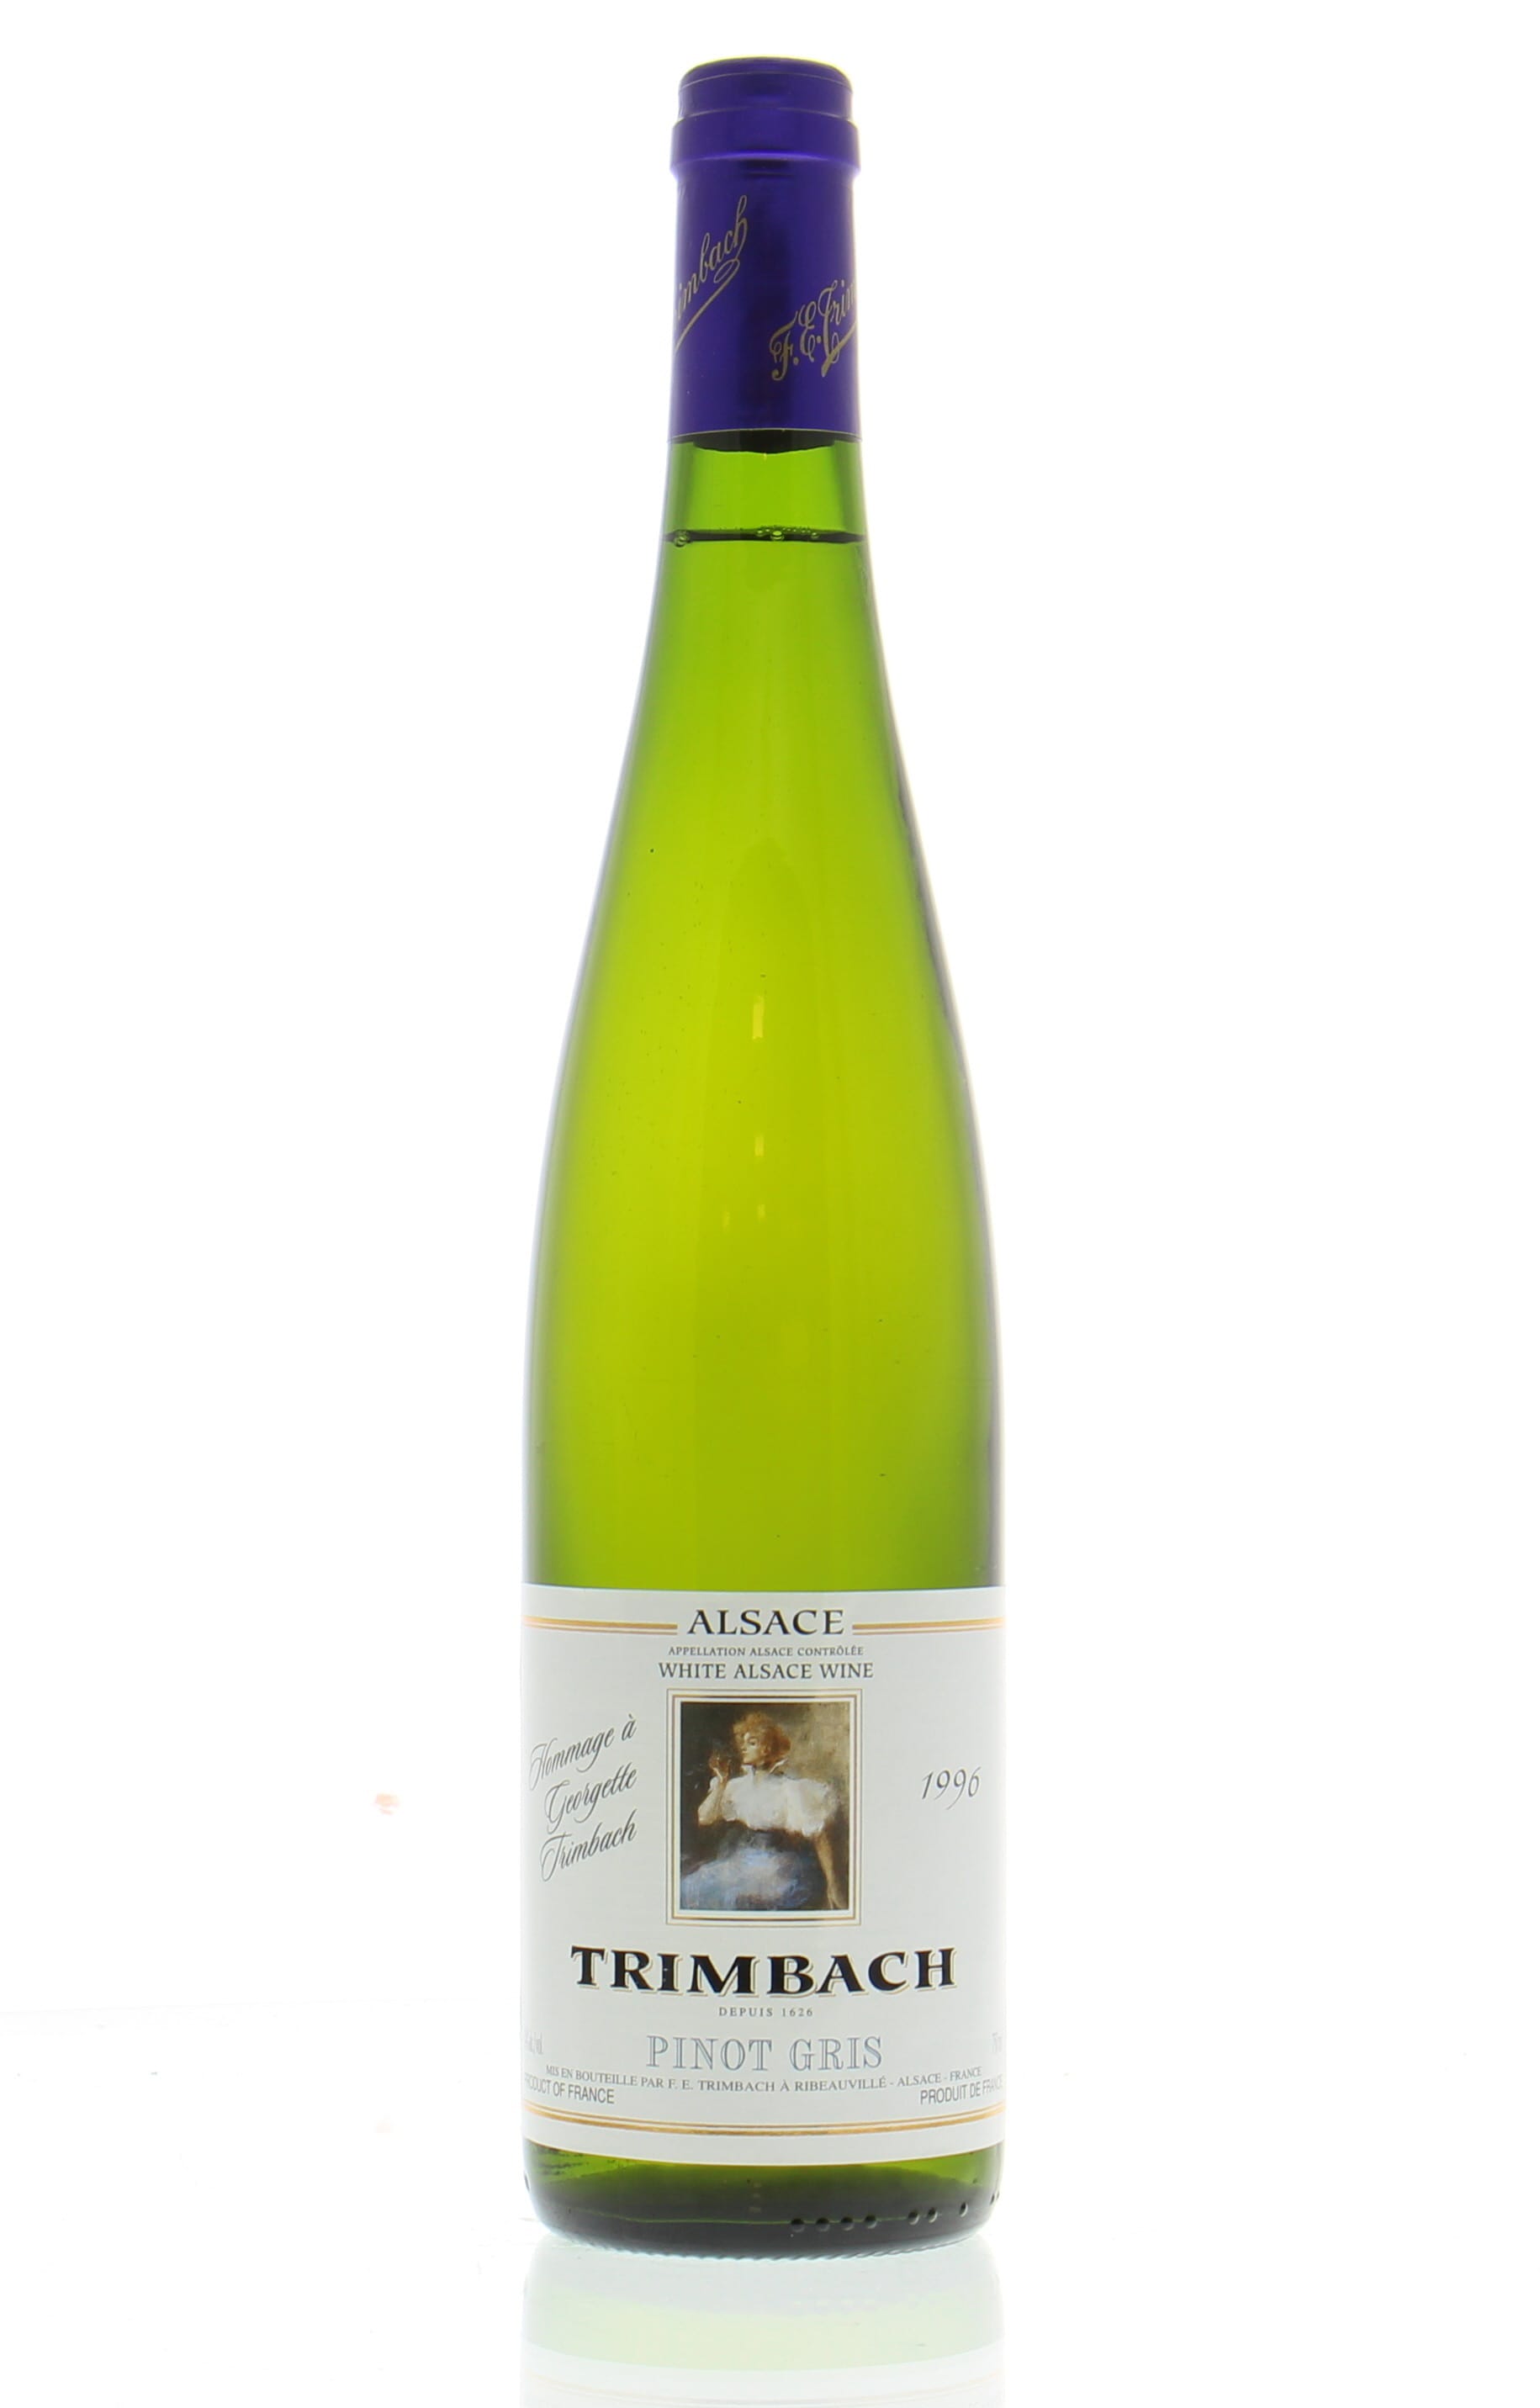 Trimbach - Pinot Gris 'Hommage a Georgette' 1996 From Original Wooden Case